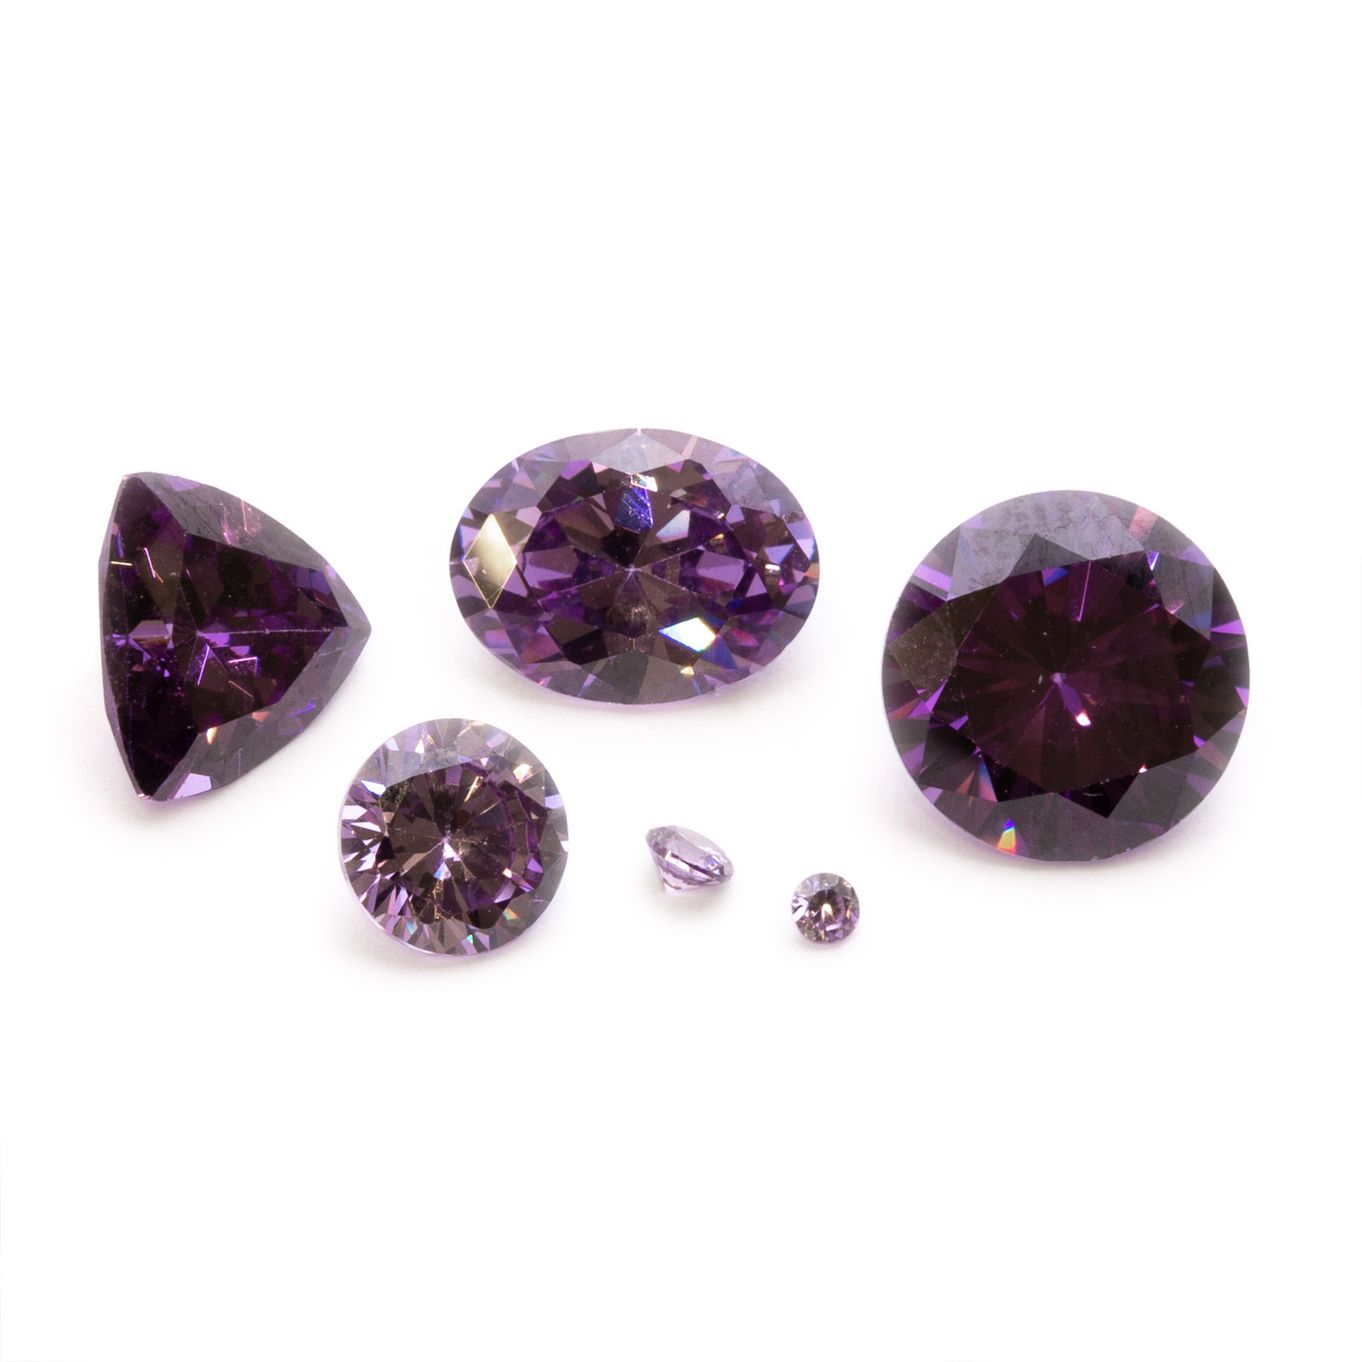 Let's Get To Know The Gemstone Called Cubic Zirconia - Astteria